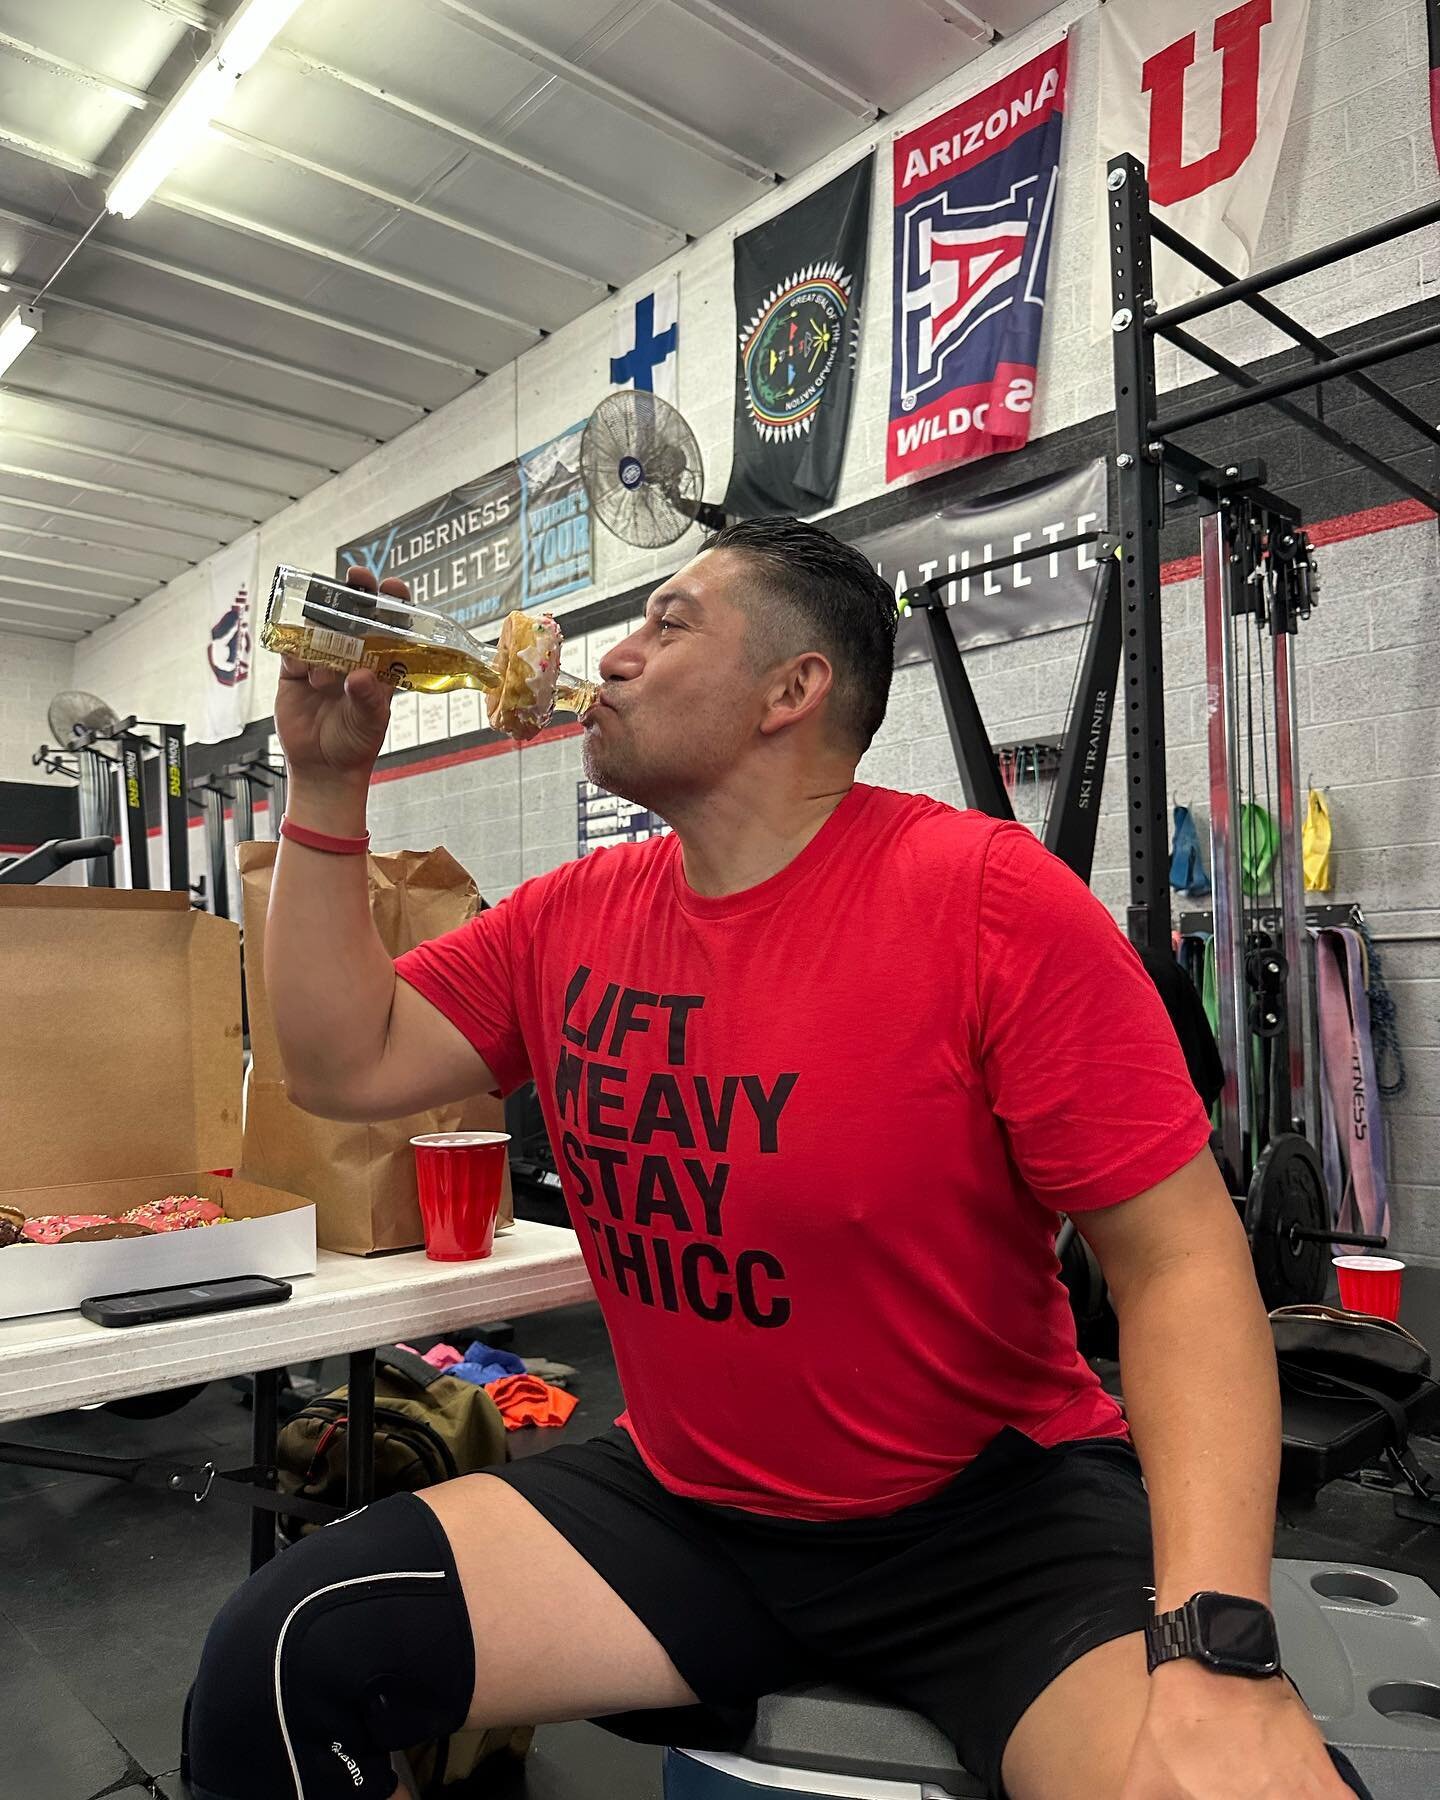 @d_g_64 rocking the ultimate ThiccFit combination, the donut around the neck of the Corona.

#staythicc #thiccfitapparel #crossfitfourpeaks #crossfit #crossfitlife